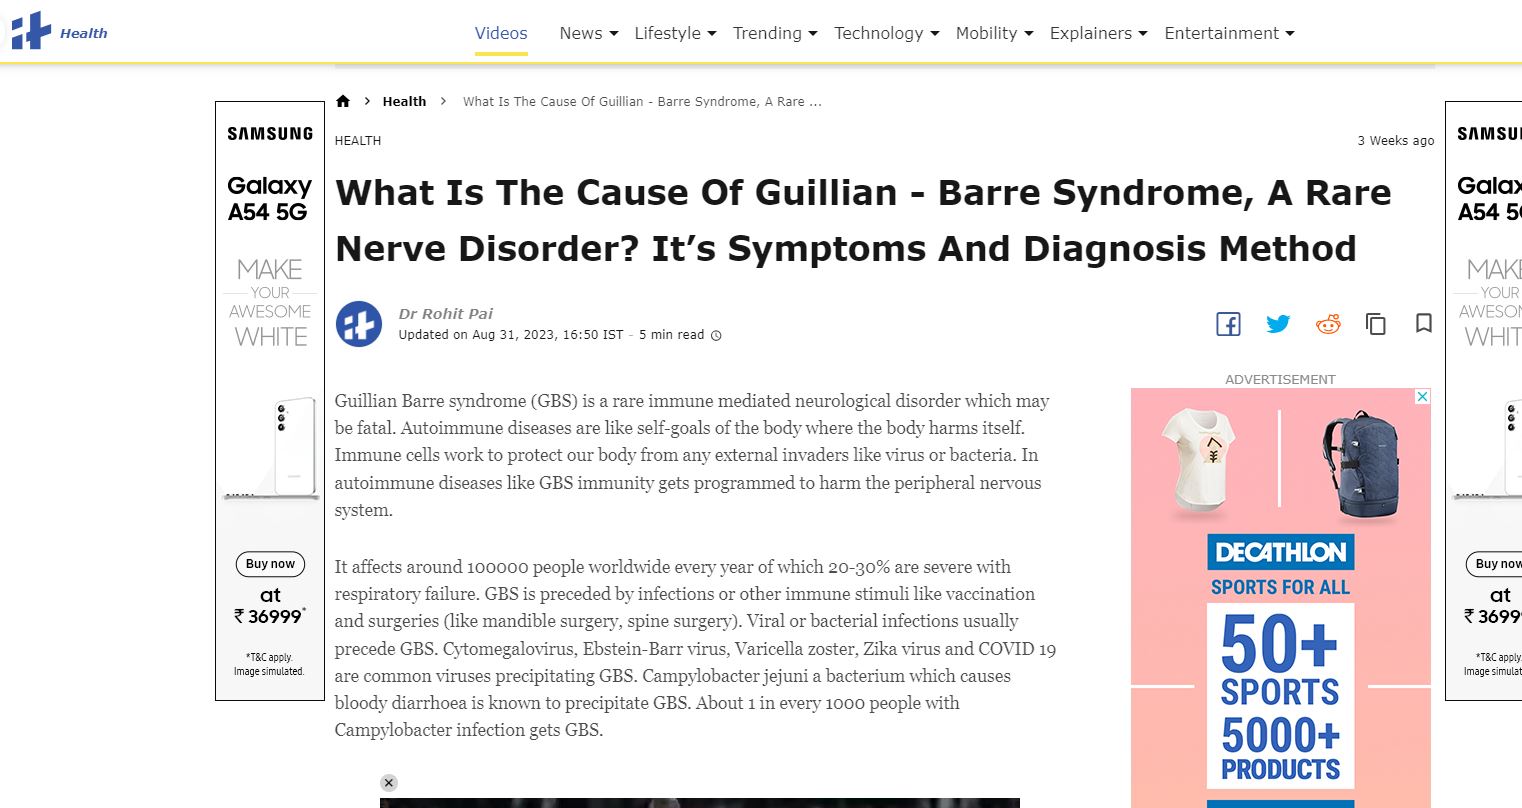 Cause Of Guillian - Barre Syndrome